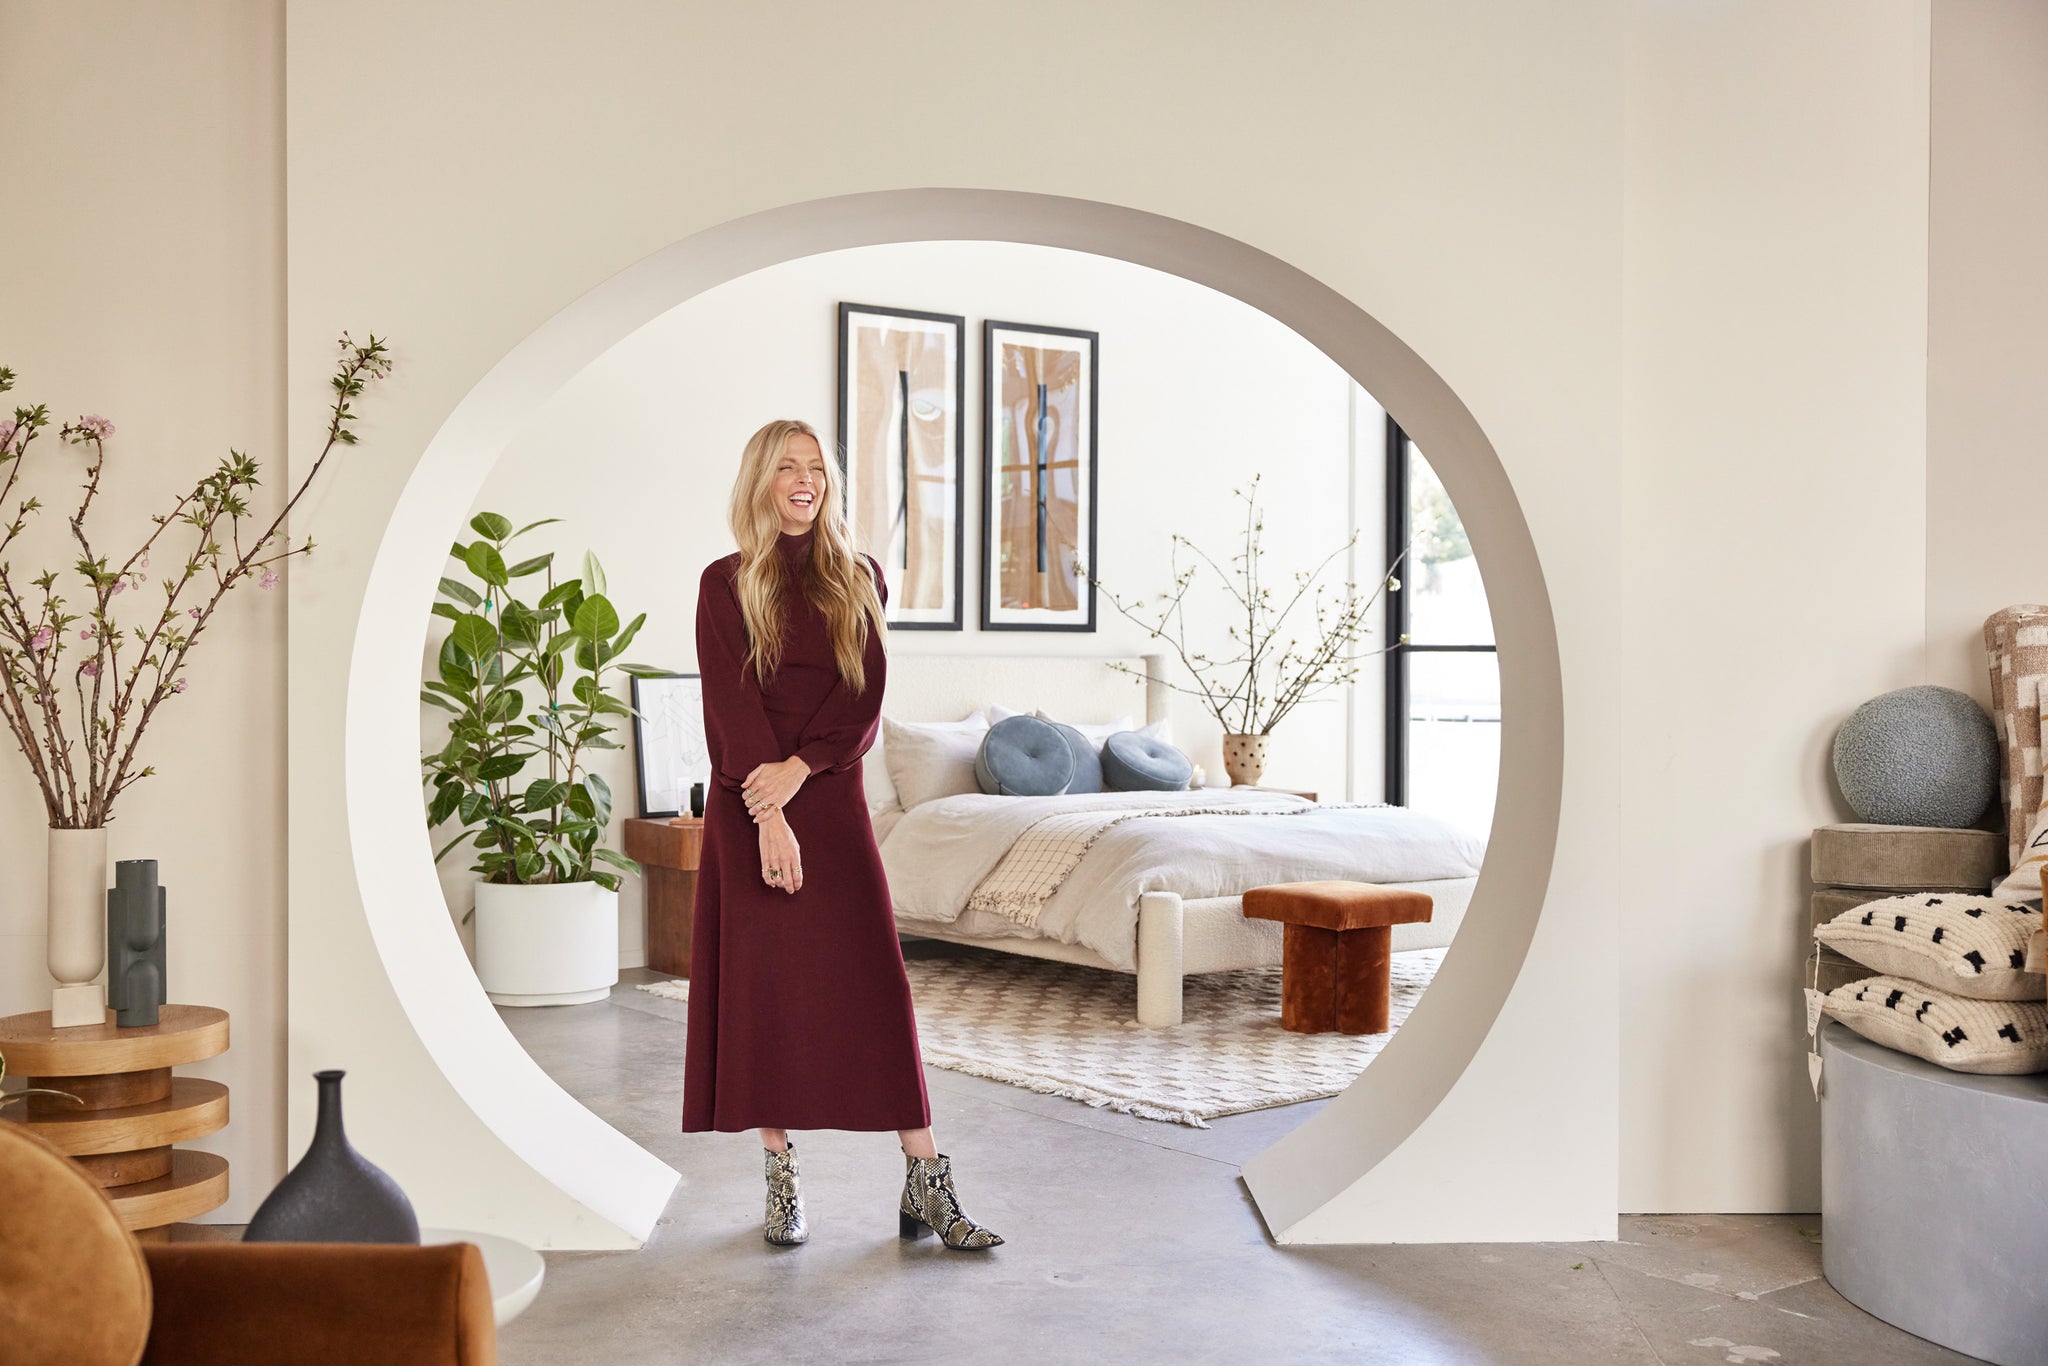 Interior designer Sarah Sherman Samuel stands in a rounded bedroom entryway in an LA pop-up shop. Behind her is the white boucle Hyvaa bed with neutral linens and flanked with plants. Stacks of pillows and vases line the entryway.